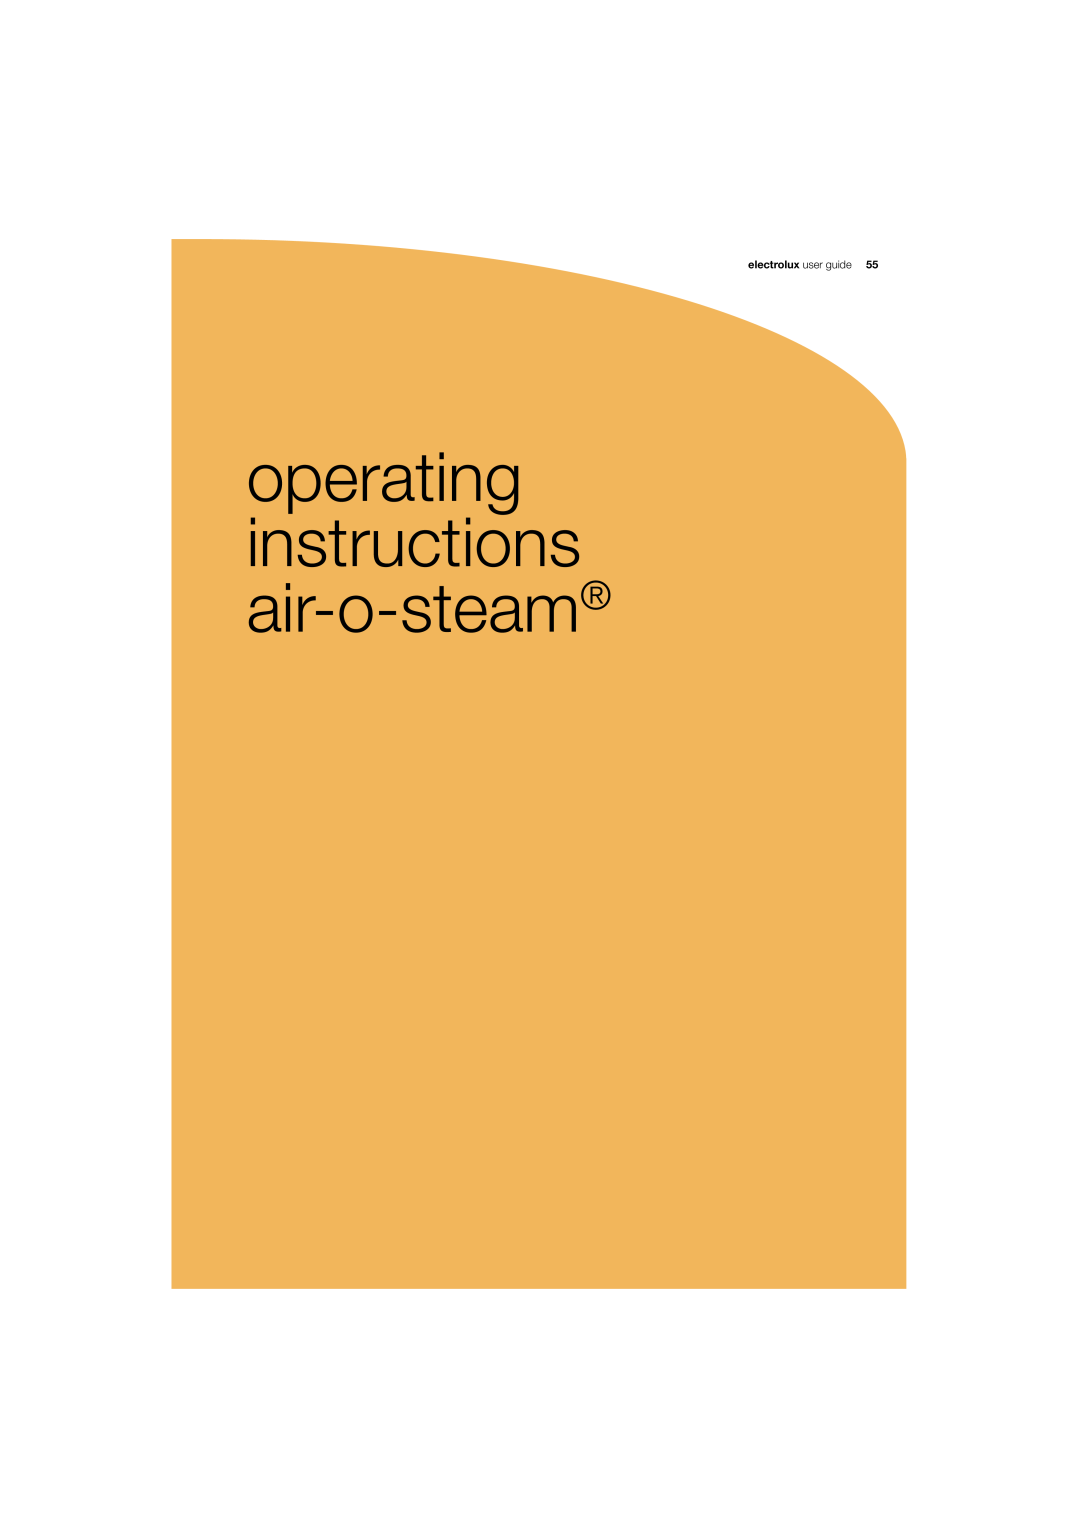 Electrolux 180 manual operating instructions air-o-steam, electrolux user guide 